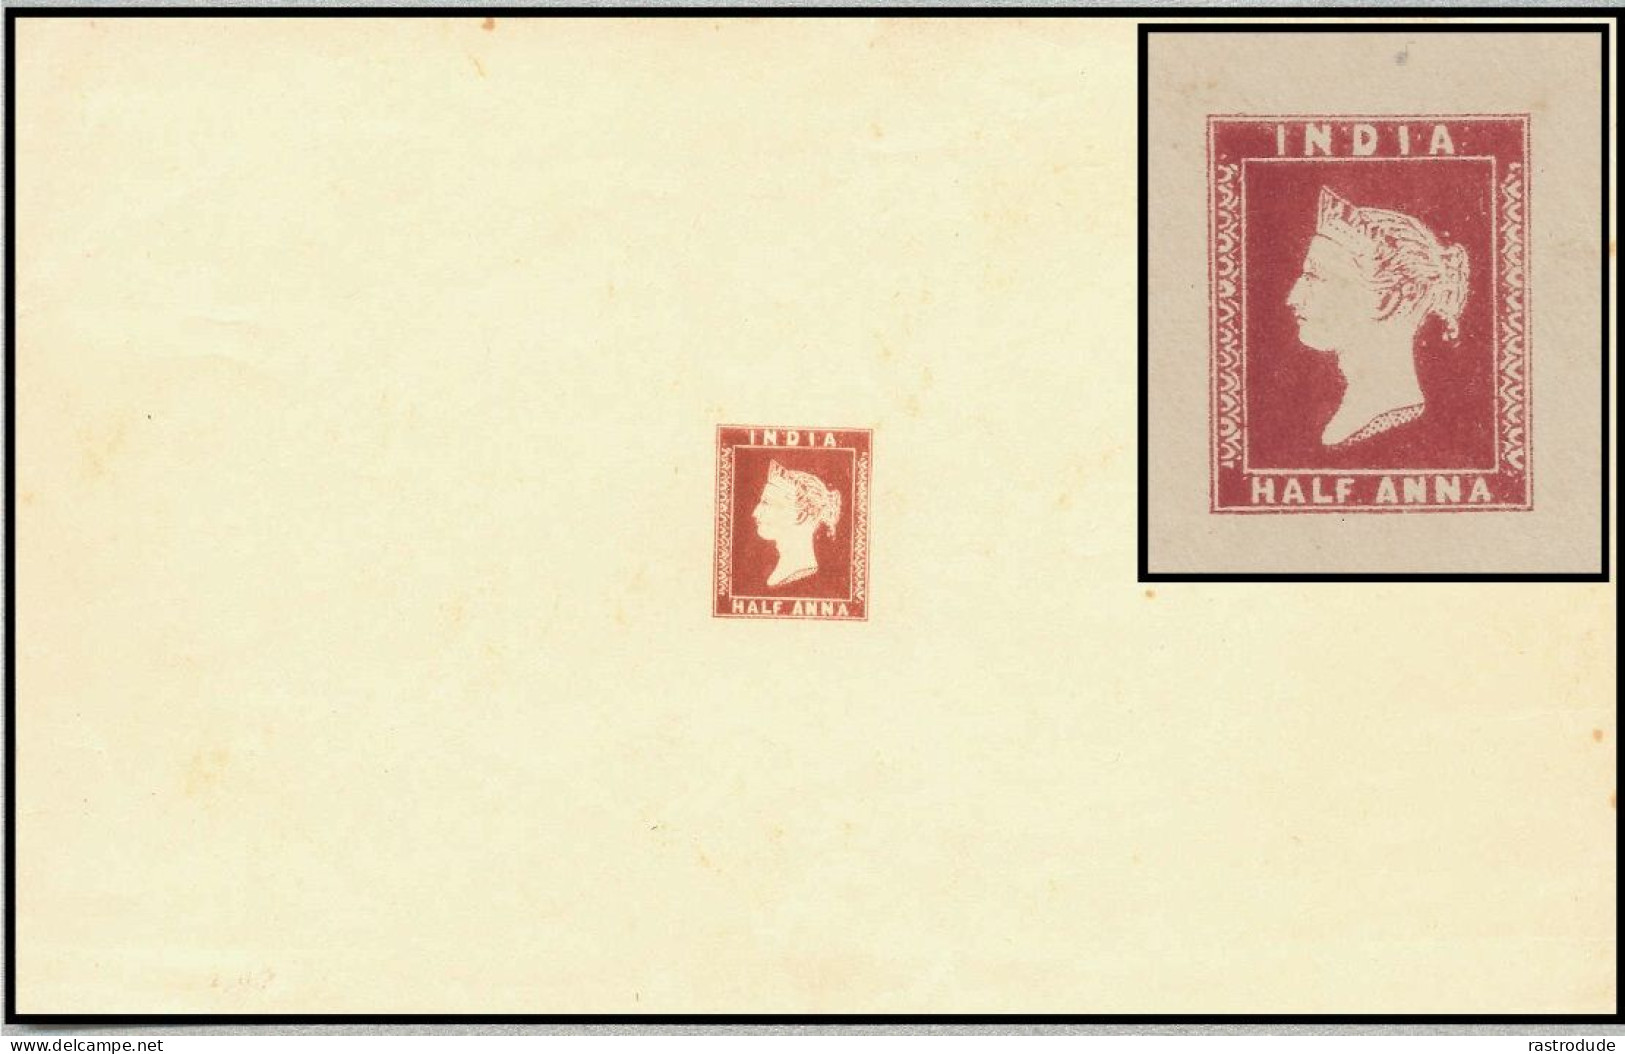 INDIA 1854 ½ A CAPT. THULLIER LITH. ESSAY SHEETLET, SPENCE Nº.68 172mm X 108mm - 1854 East India Company Administration